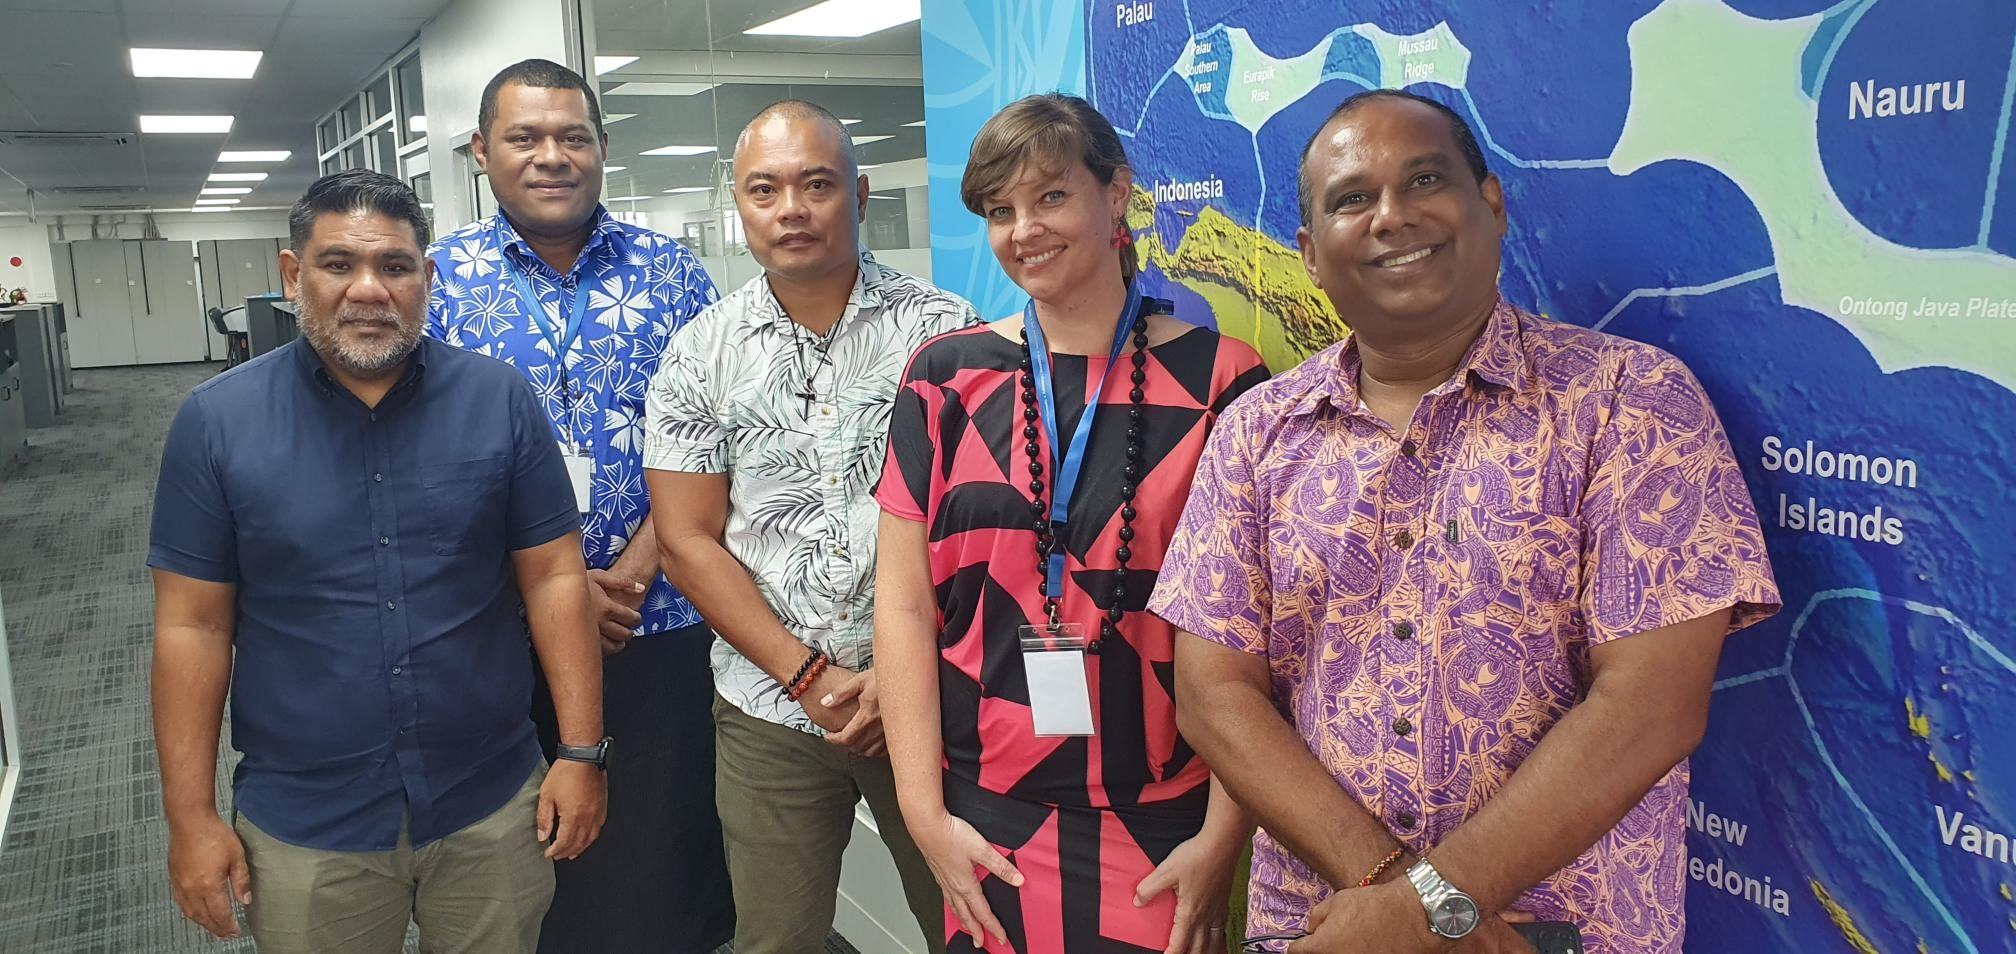 Technical training with Palau supports ocean management through defined maritime zones